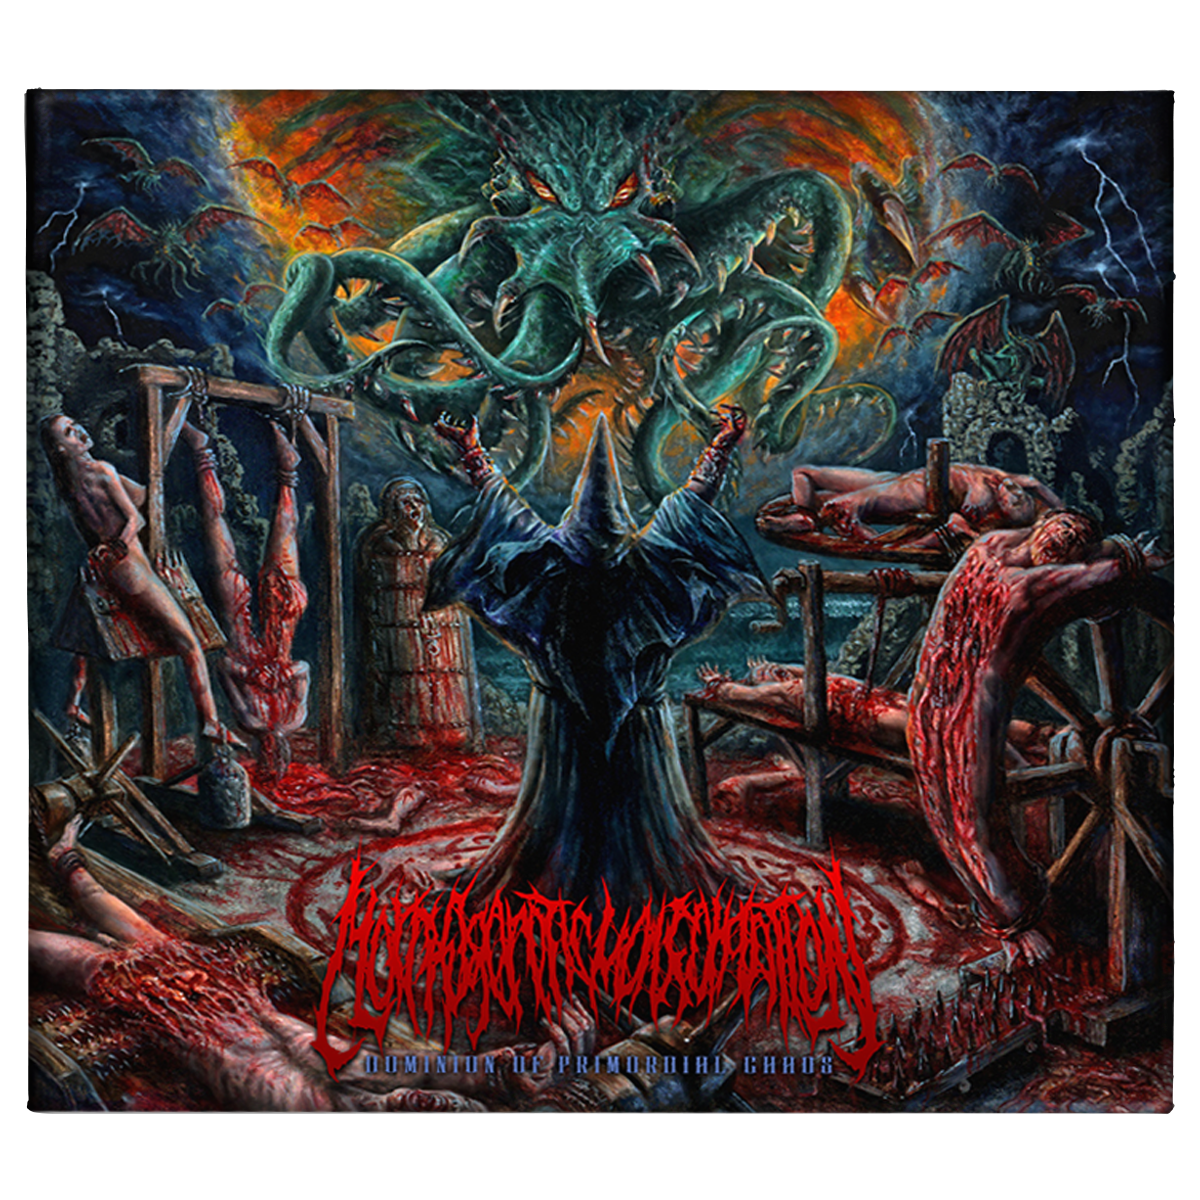 Morphogenetic Malformation ‘Dominion of Primordial Chaos’ CD